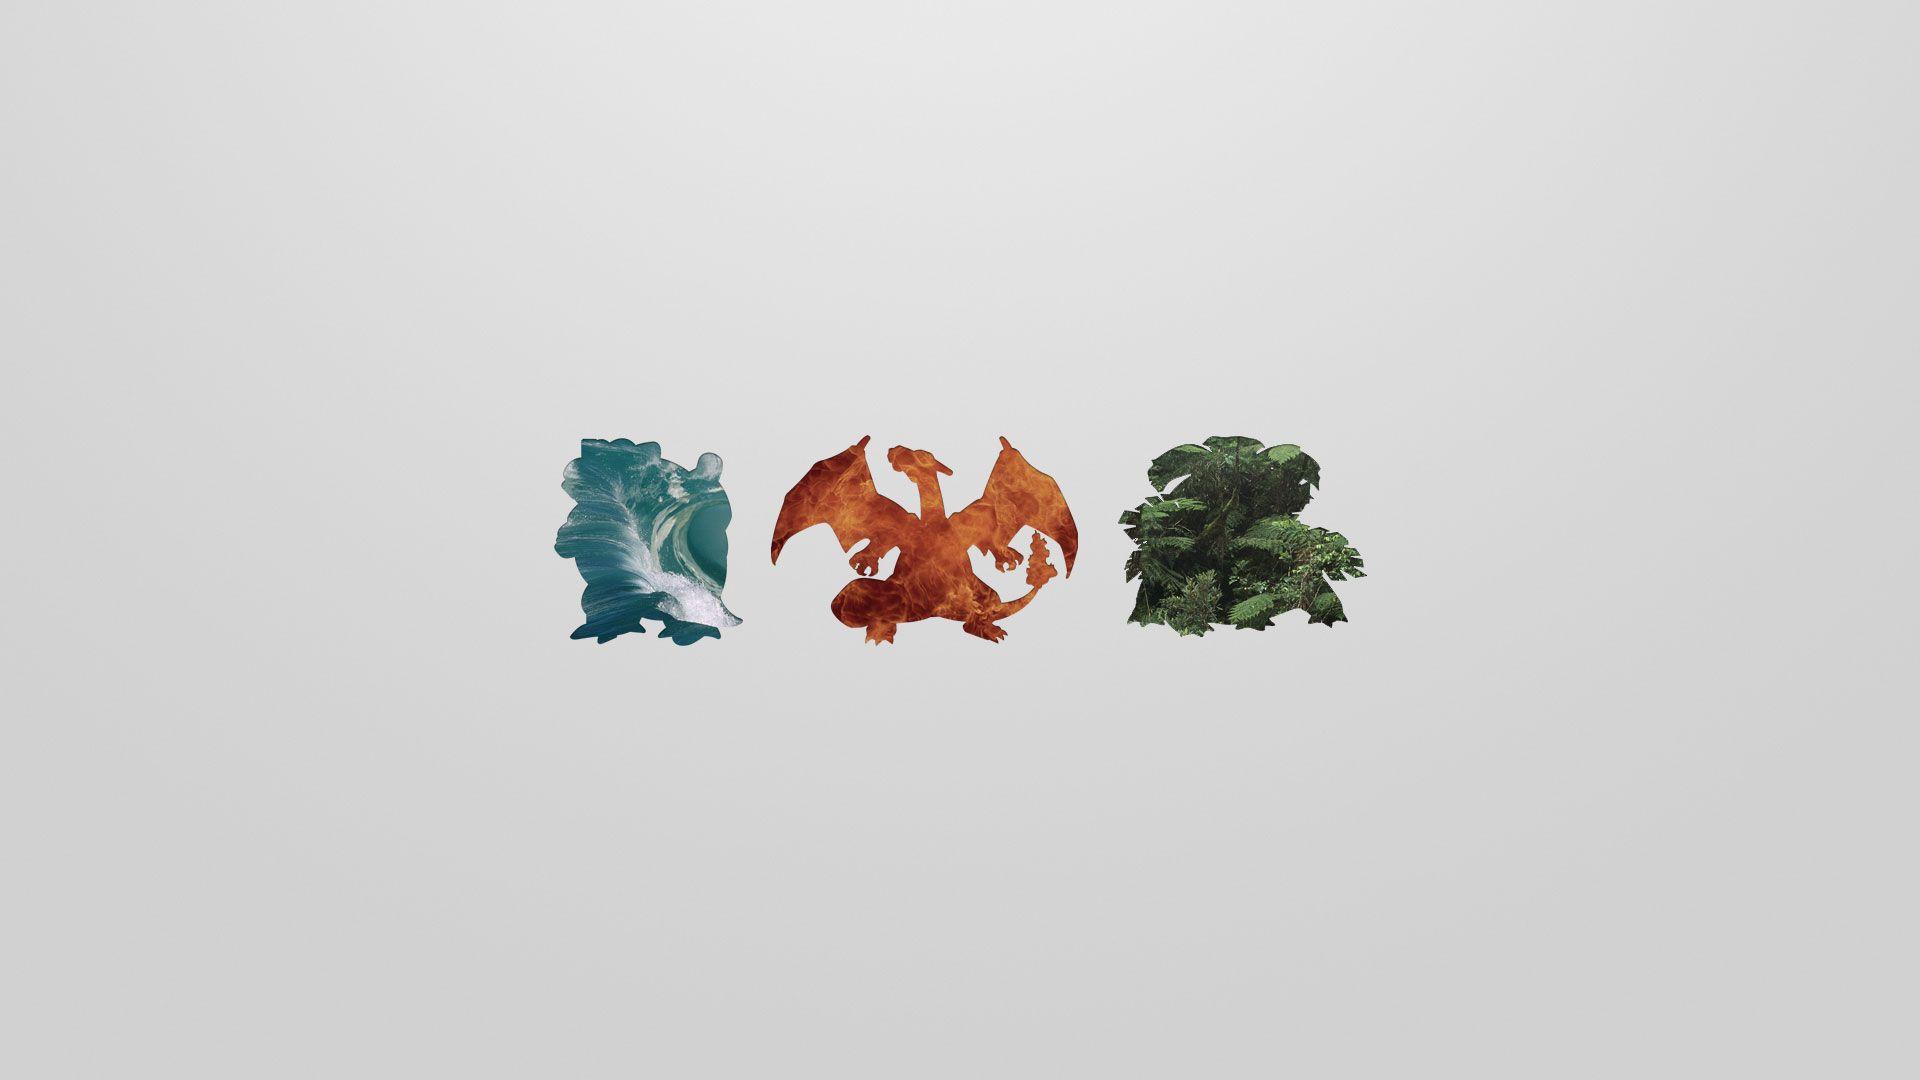 For those of you who liked the pokemon starters wallpaper, here